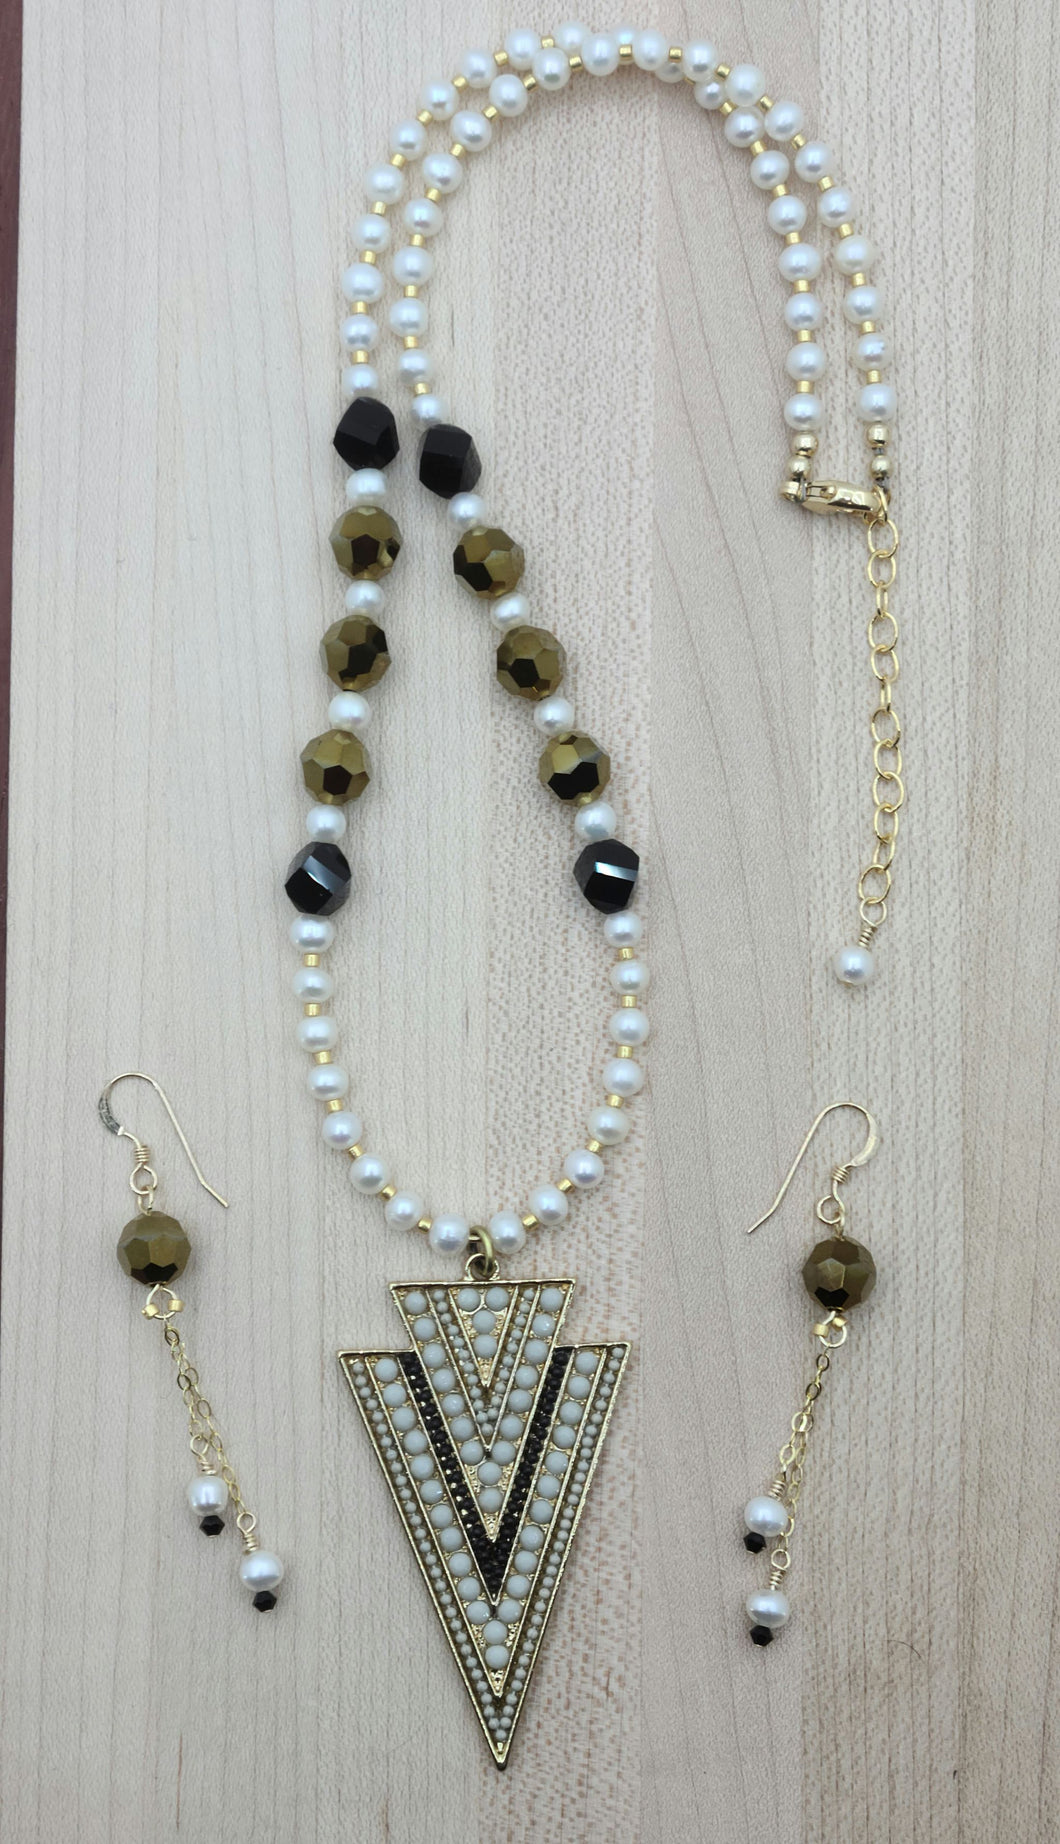 White/Gold/Black Arrowhead on Pearls Necklace & Earrings